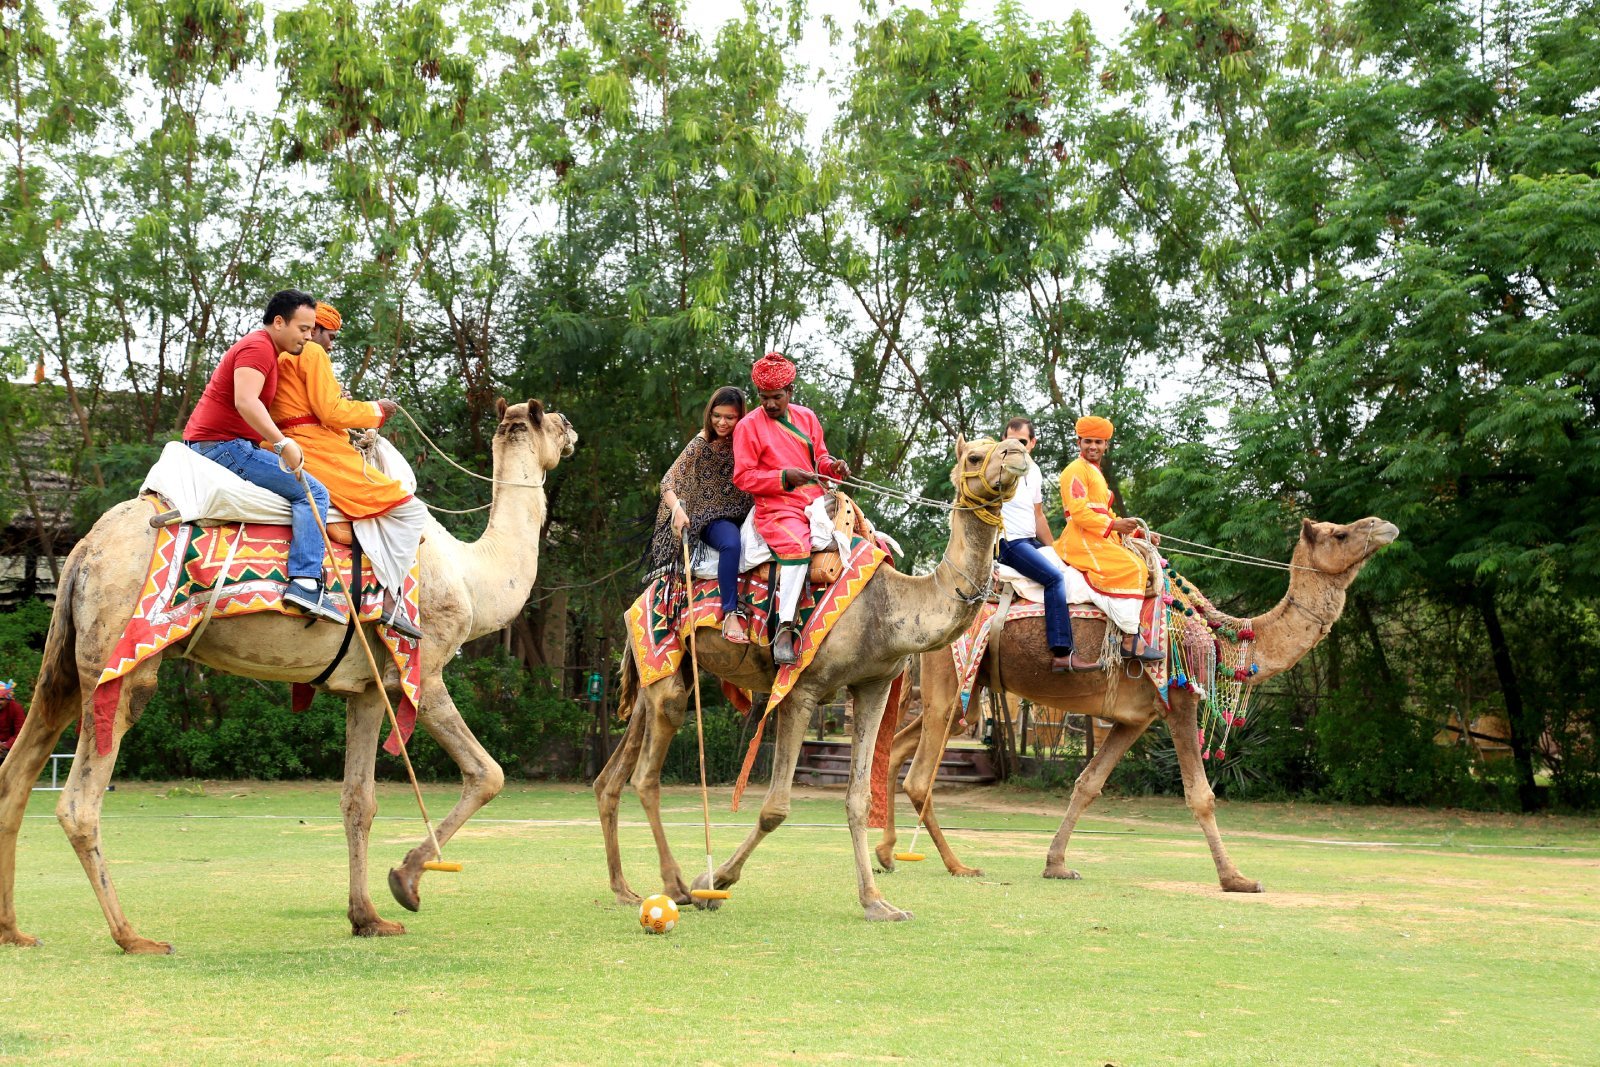 <p class="wp-caption-text">Image Credit: Shutterstock / Mukesh Kumar Jwala</p>  <p><span>Polo, the sport of kings, has a long and illustrious history in Jaipur, with the city being one of India’s traditional polo centers. Attending a polo match in Jaipur offers a glimpse into the regal sport and the opportunity to witness the thrilling action up close. The experience of watching skilled horsemen in traditional attire competing on the field is exhilarating and offers insight into the aristocratic heritage of Jaipur.</span></p>